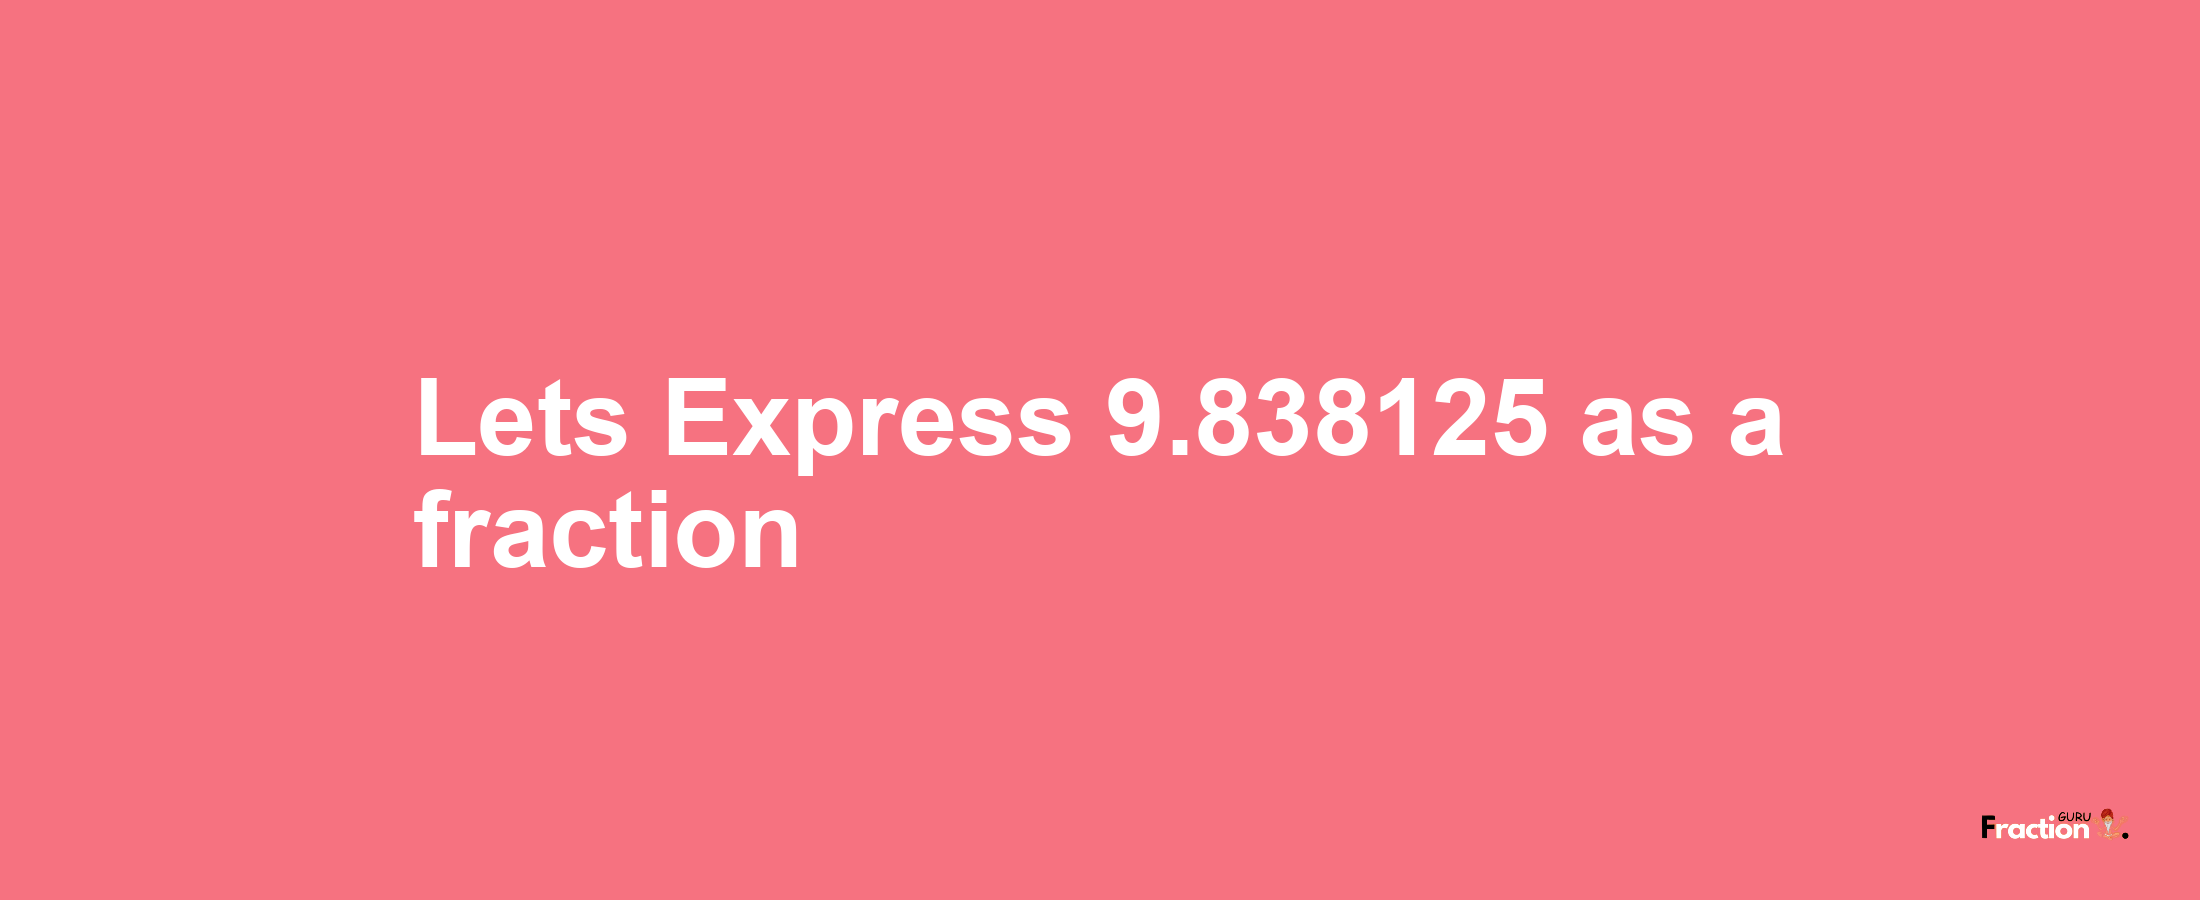 Lets Express 9.838125 as afraction